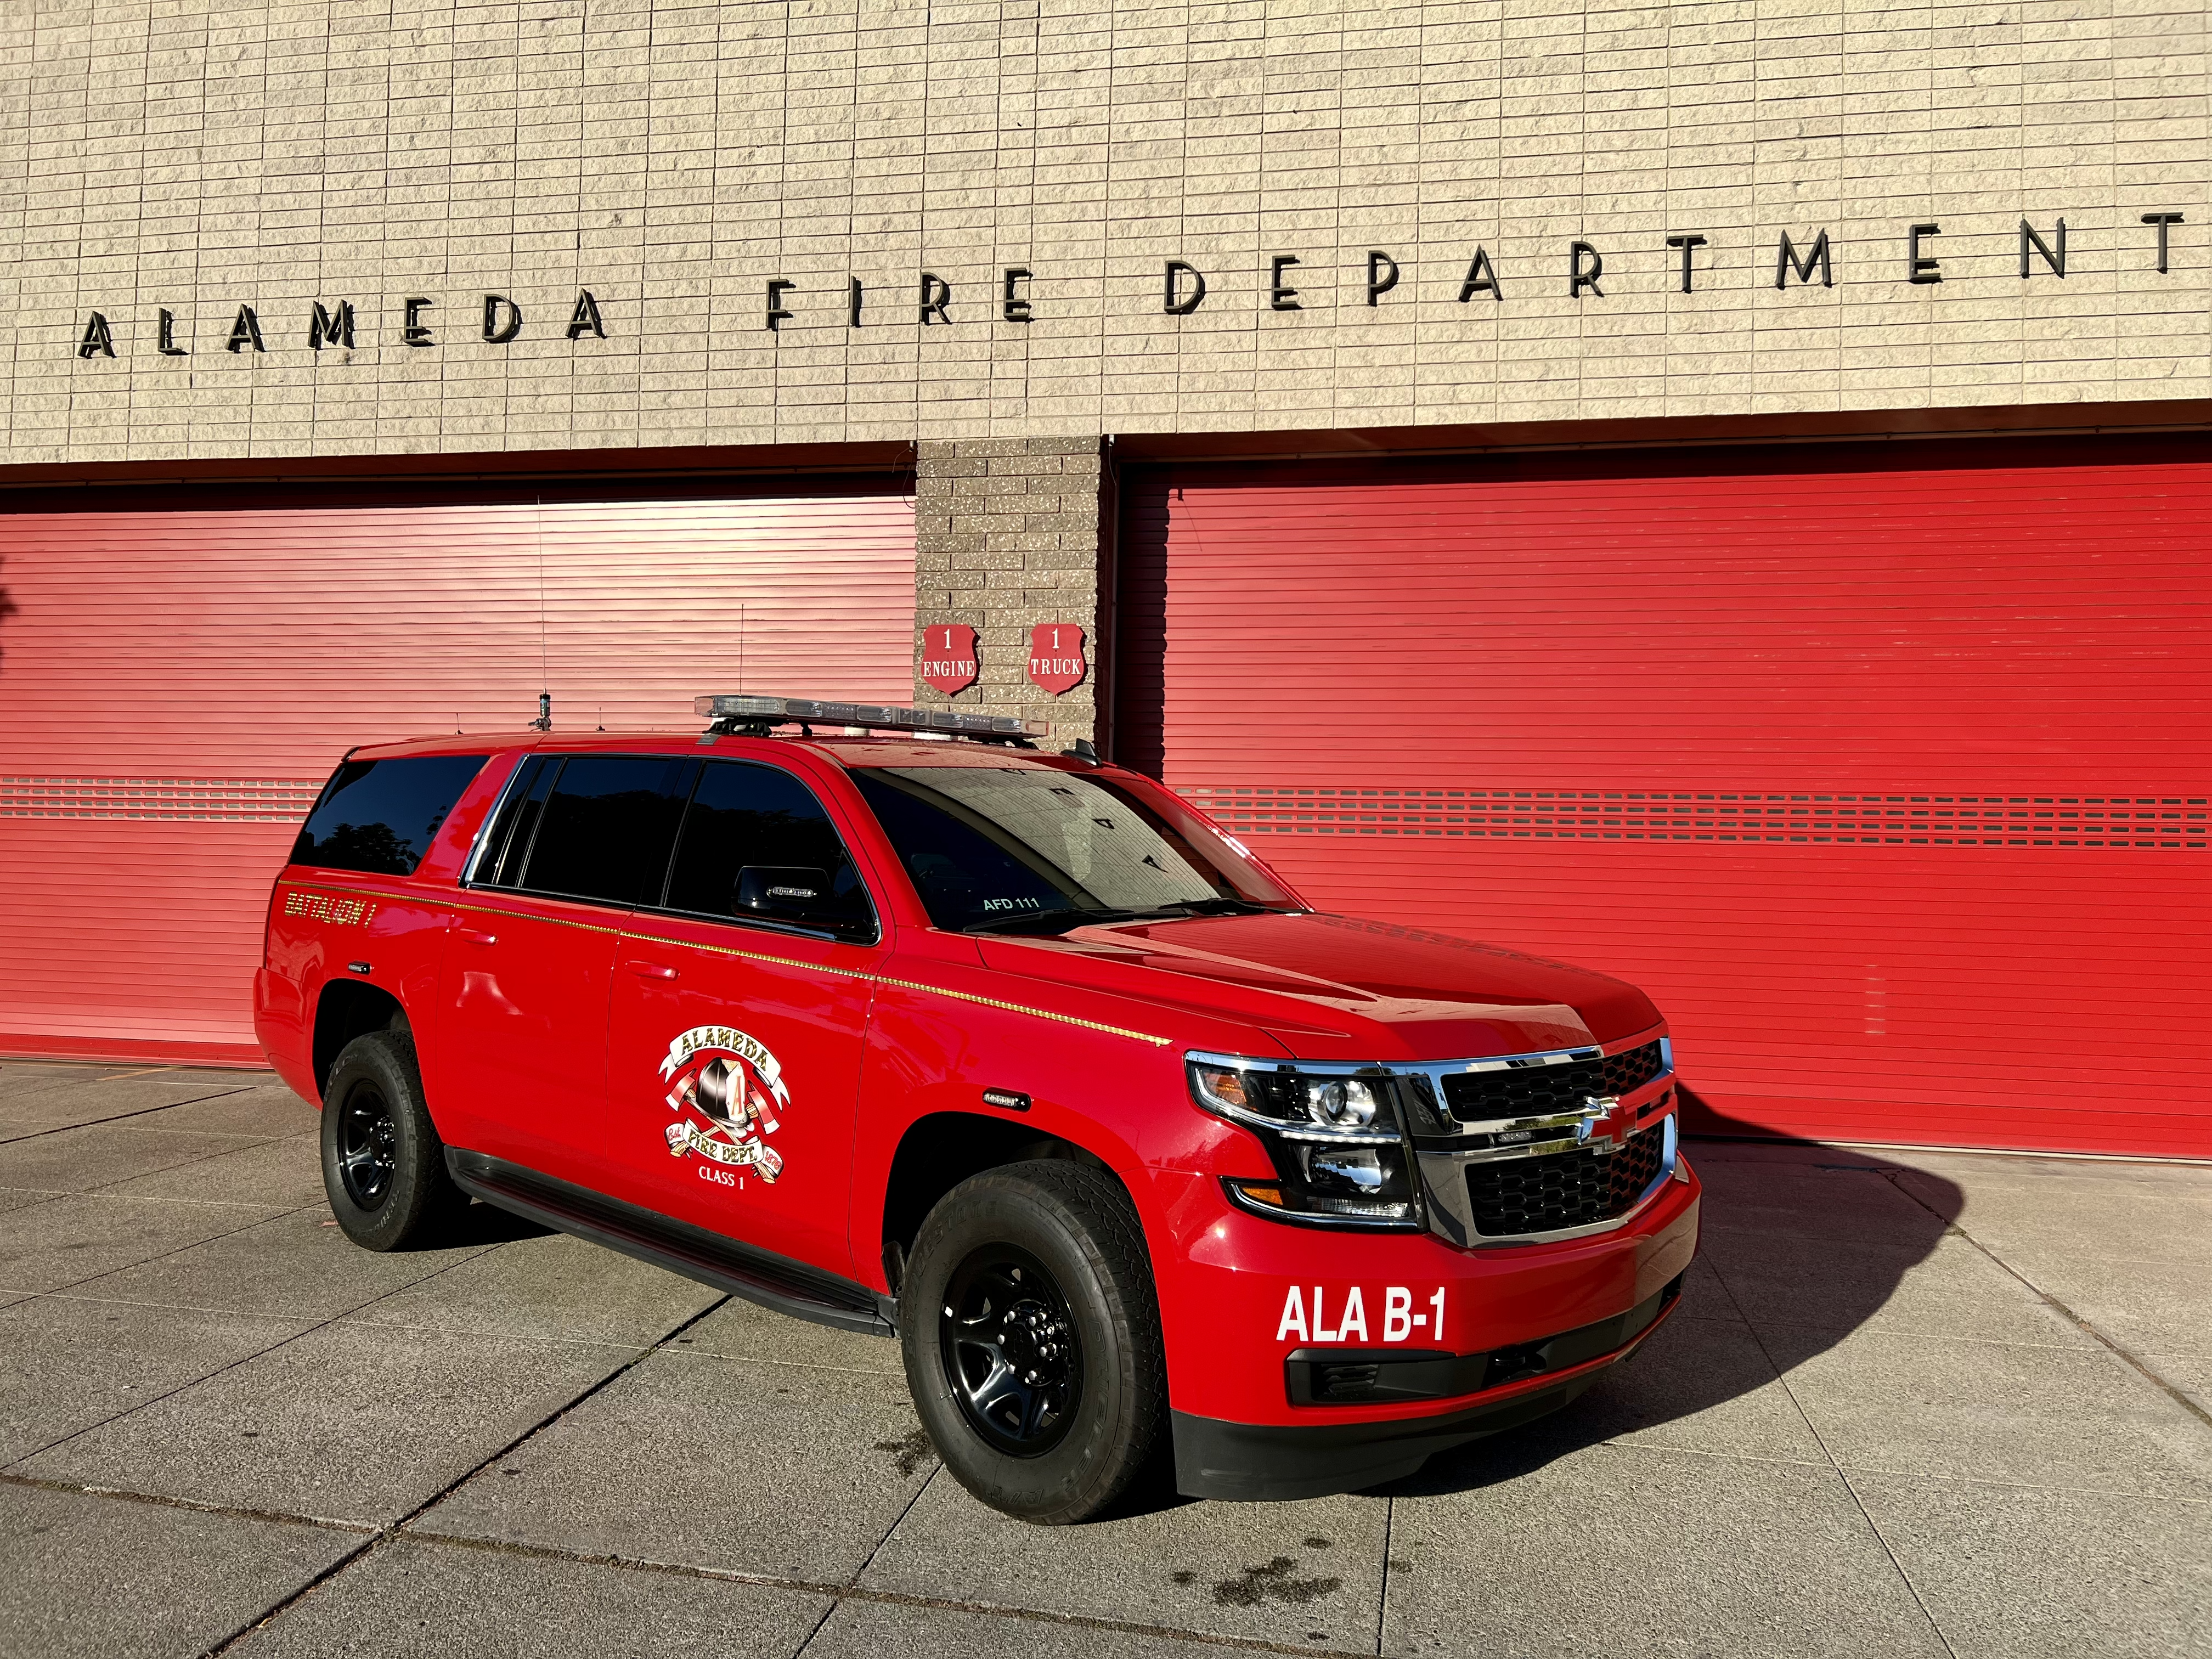 Battalion 1 Vehicle in front of Station 1